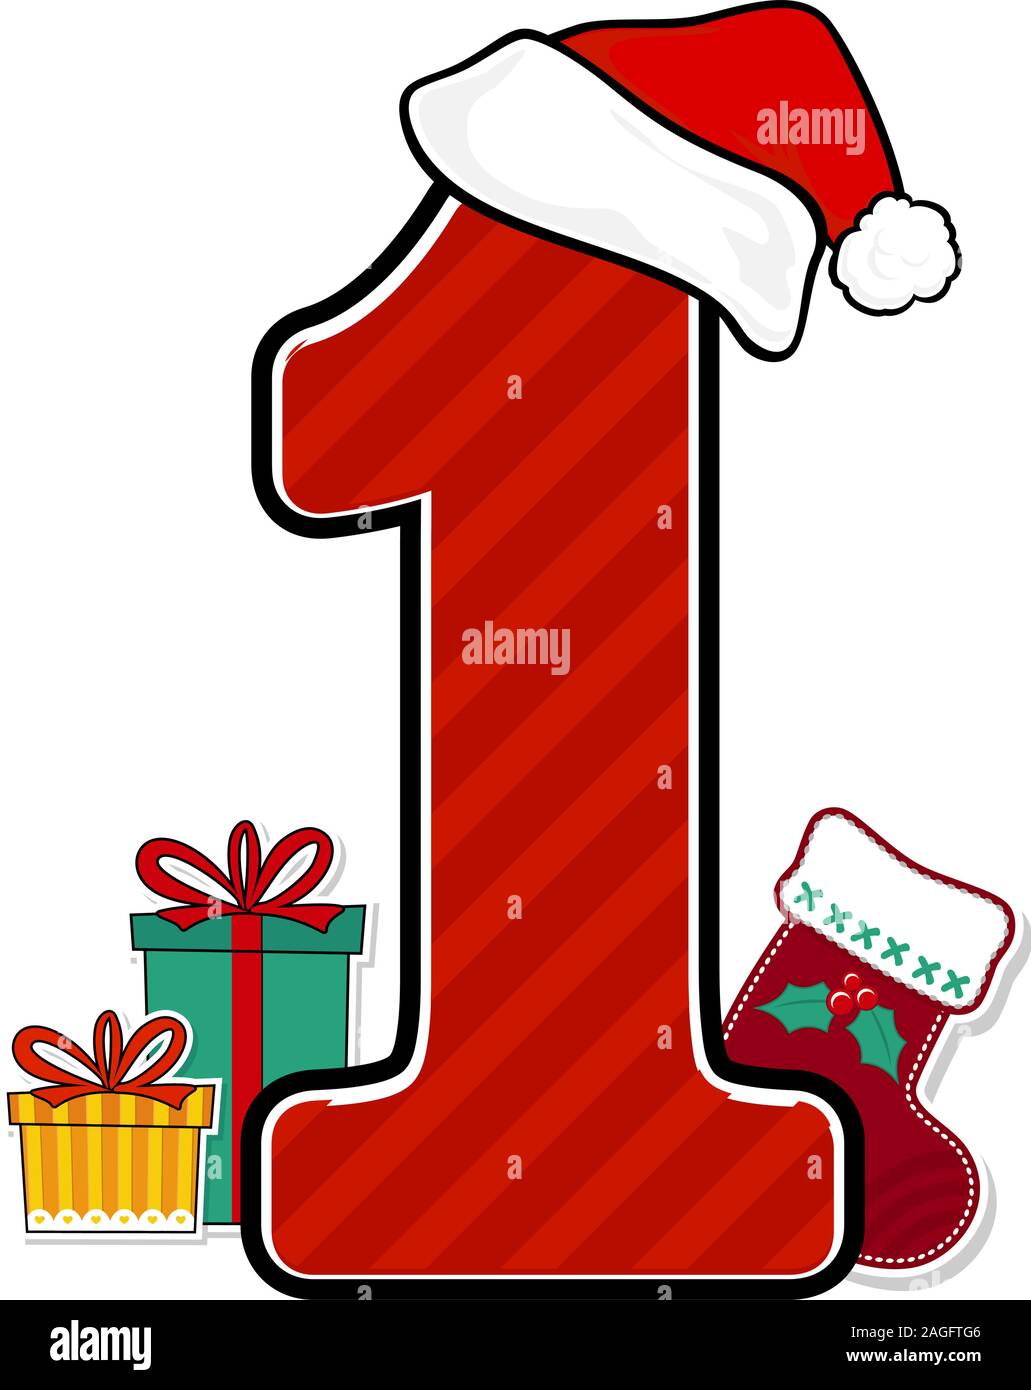 https://c8.alamy.com/comp/2AGFTG6/number-1-with-red-santas-hat-and-christmas-design-elements-isolated-on-white-background-can-be-used-for-holiday-season-card-nursery-decoration-or-c-2AGFTG6.jpg